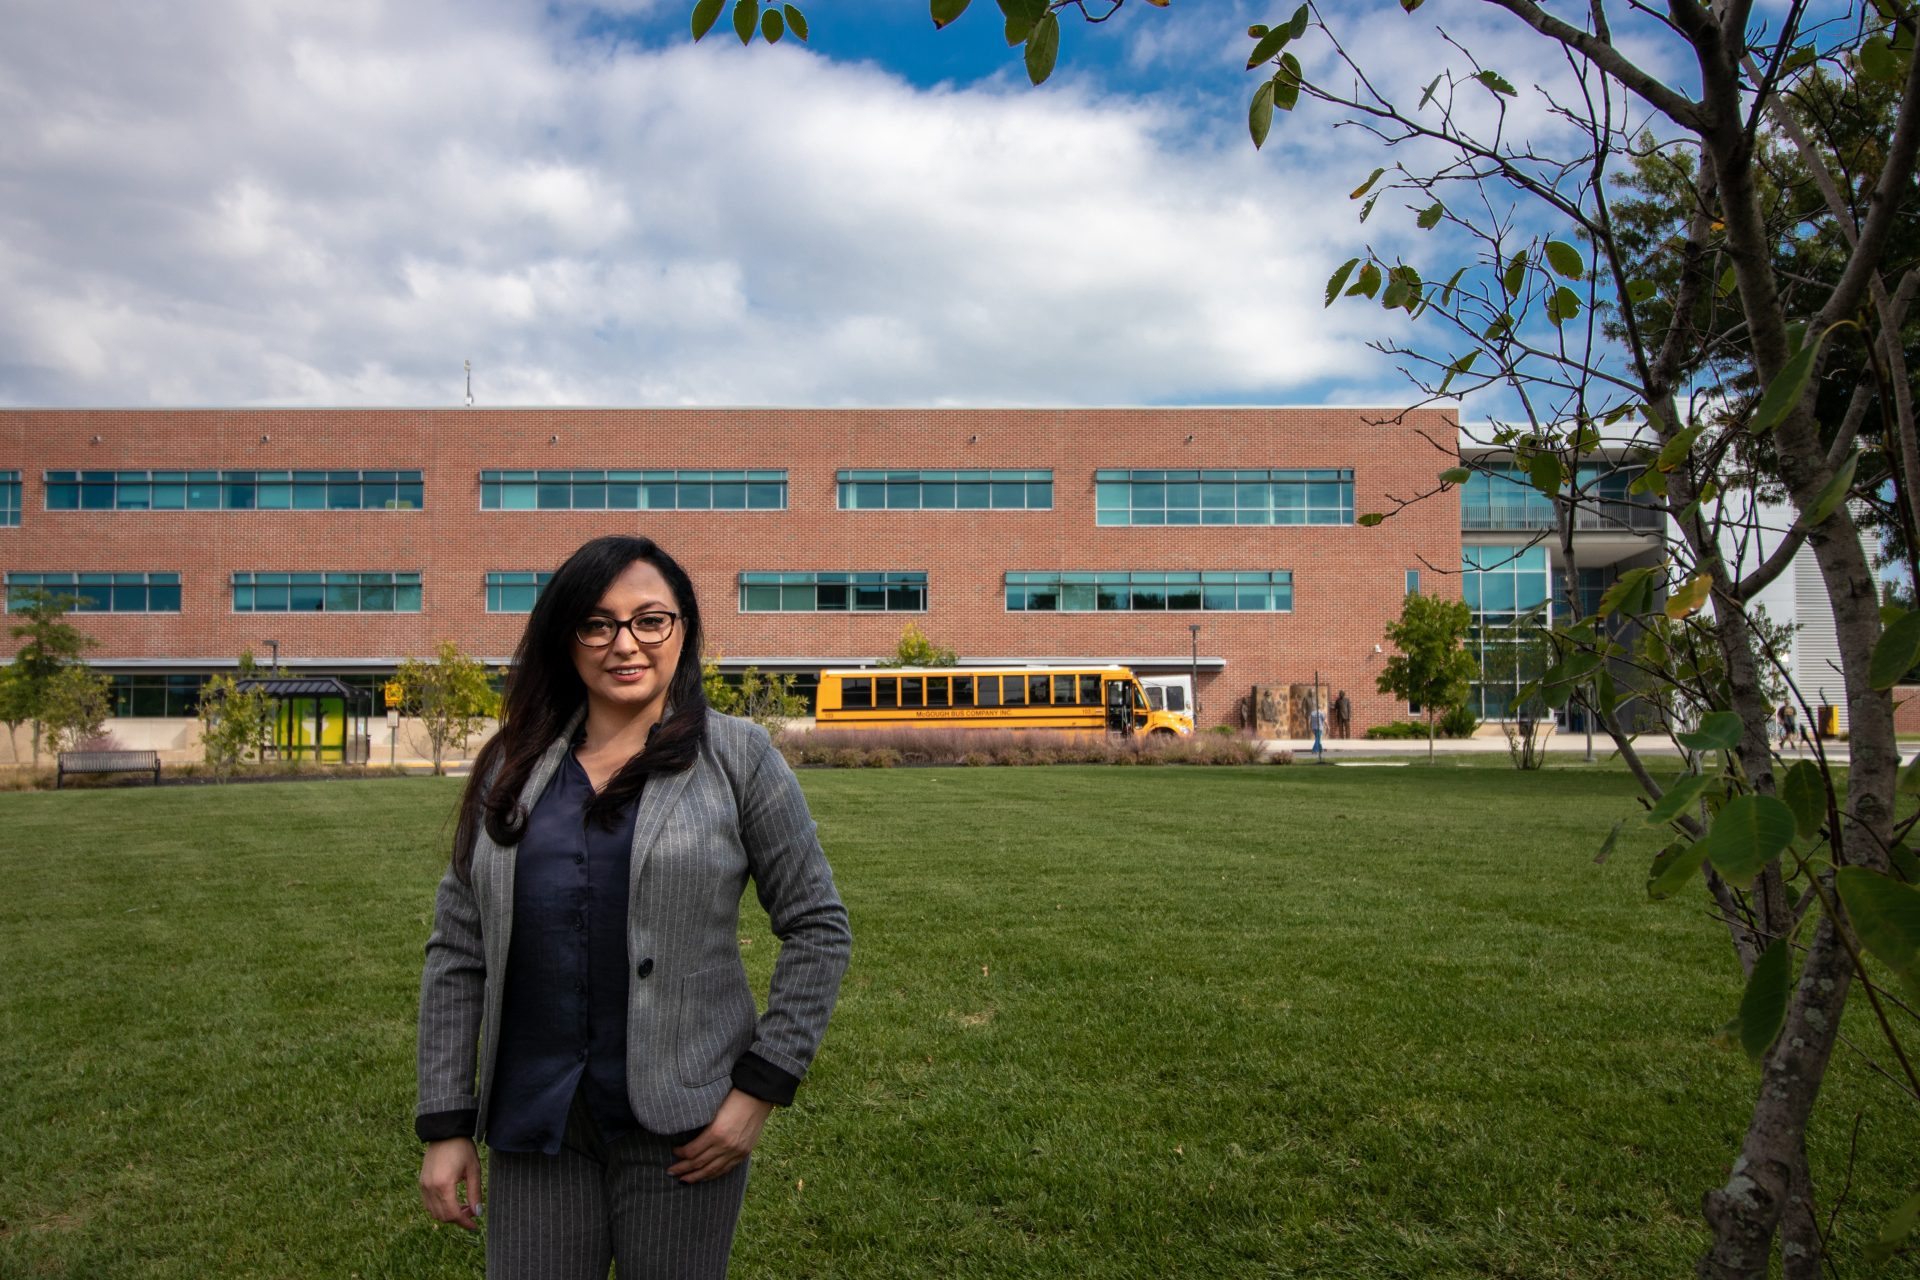 business woman standing on grass with brick building and yellow school bus in the distance